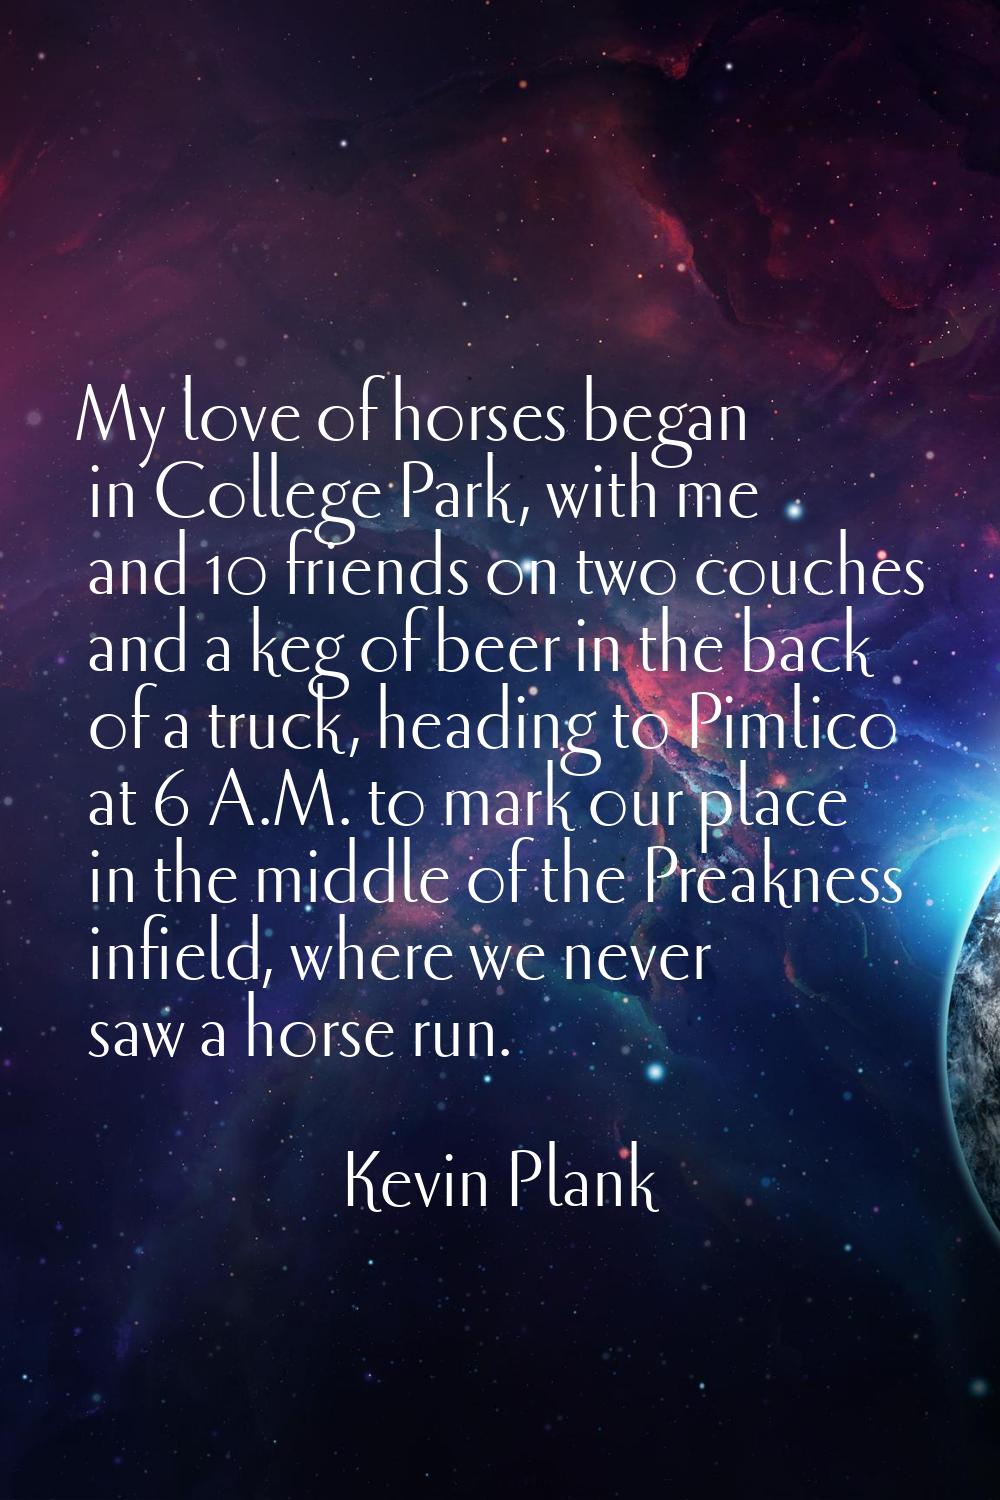 My love of horses began in College Park, with me and 10 friends on two couches and a keg of beer in